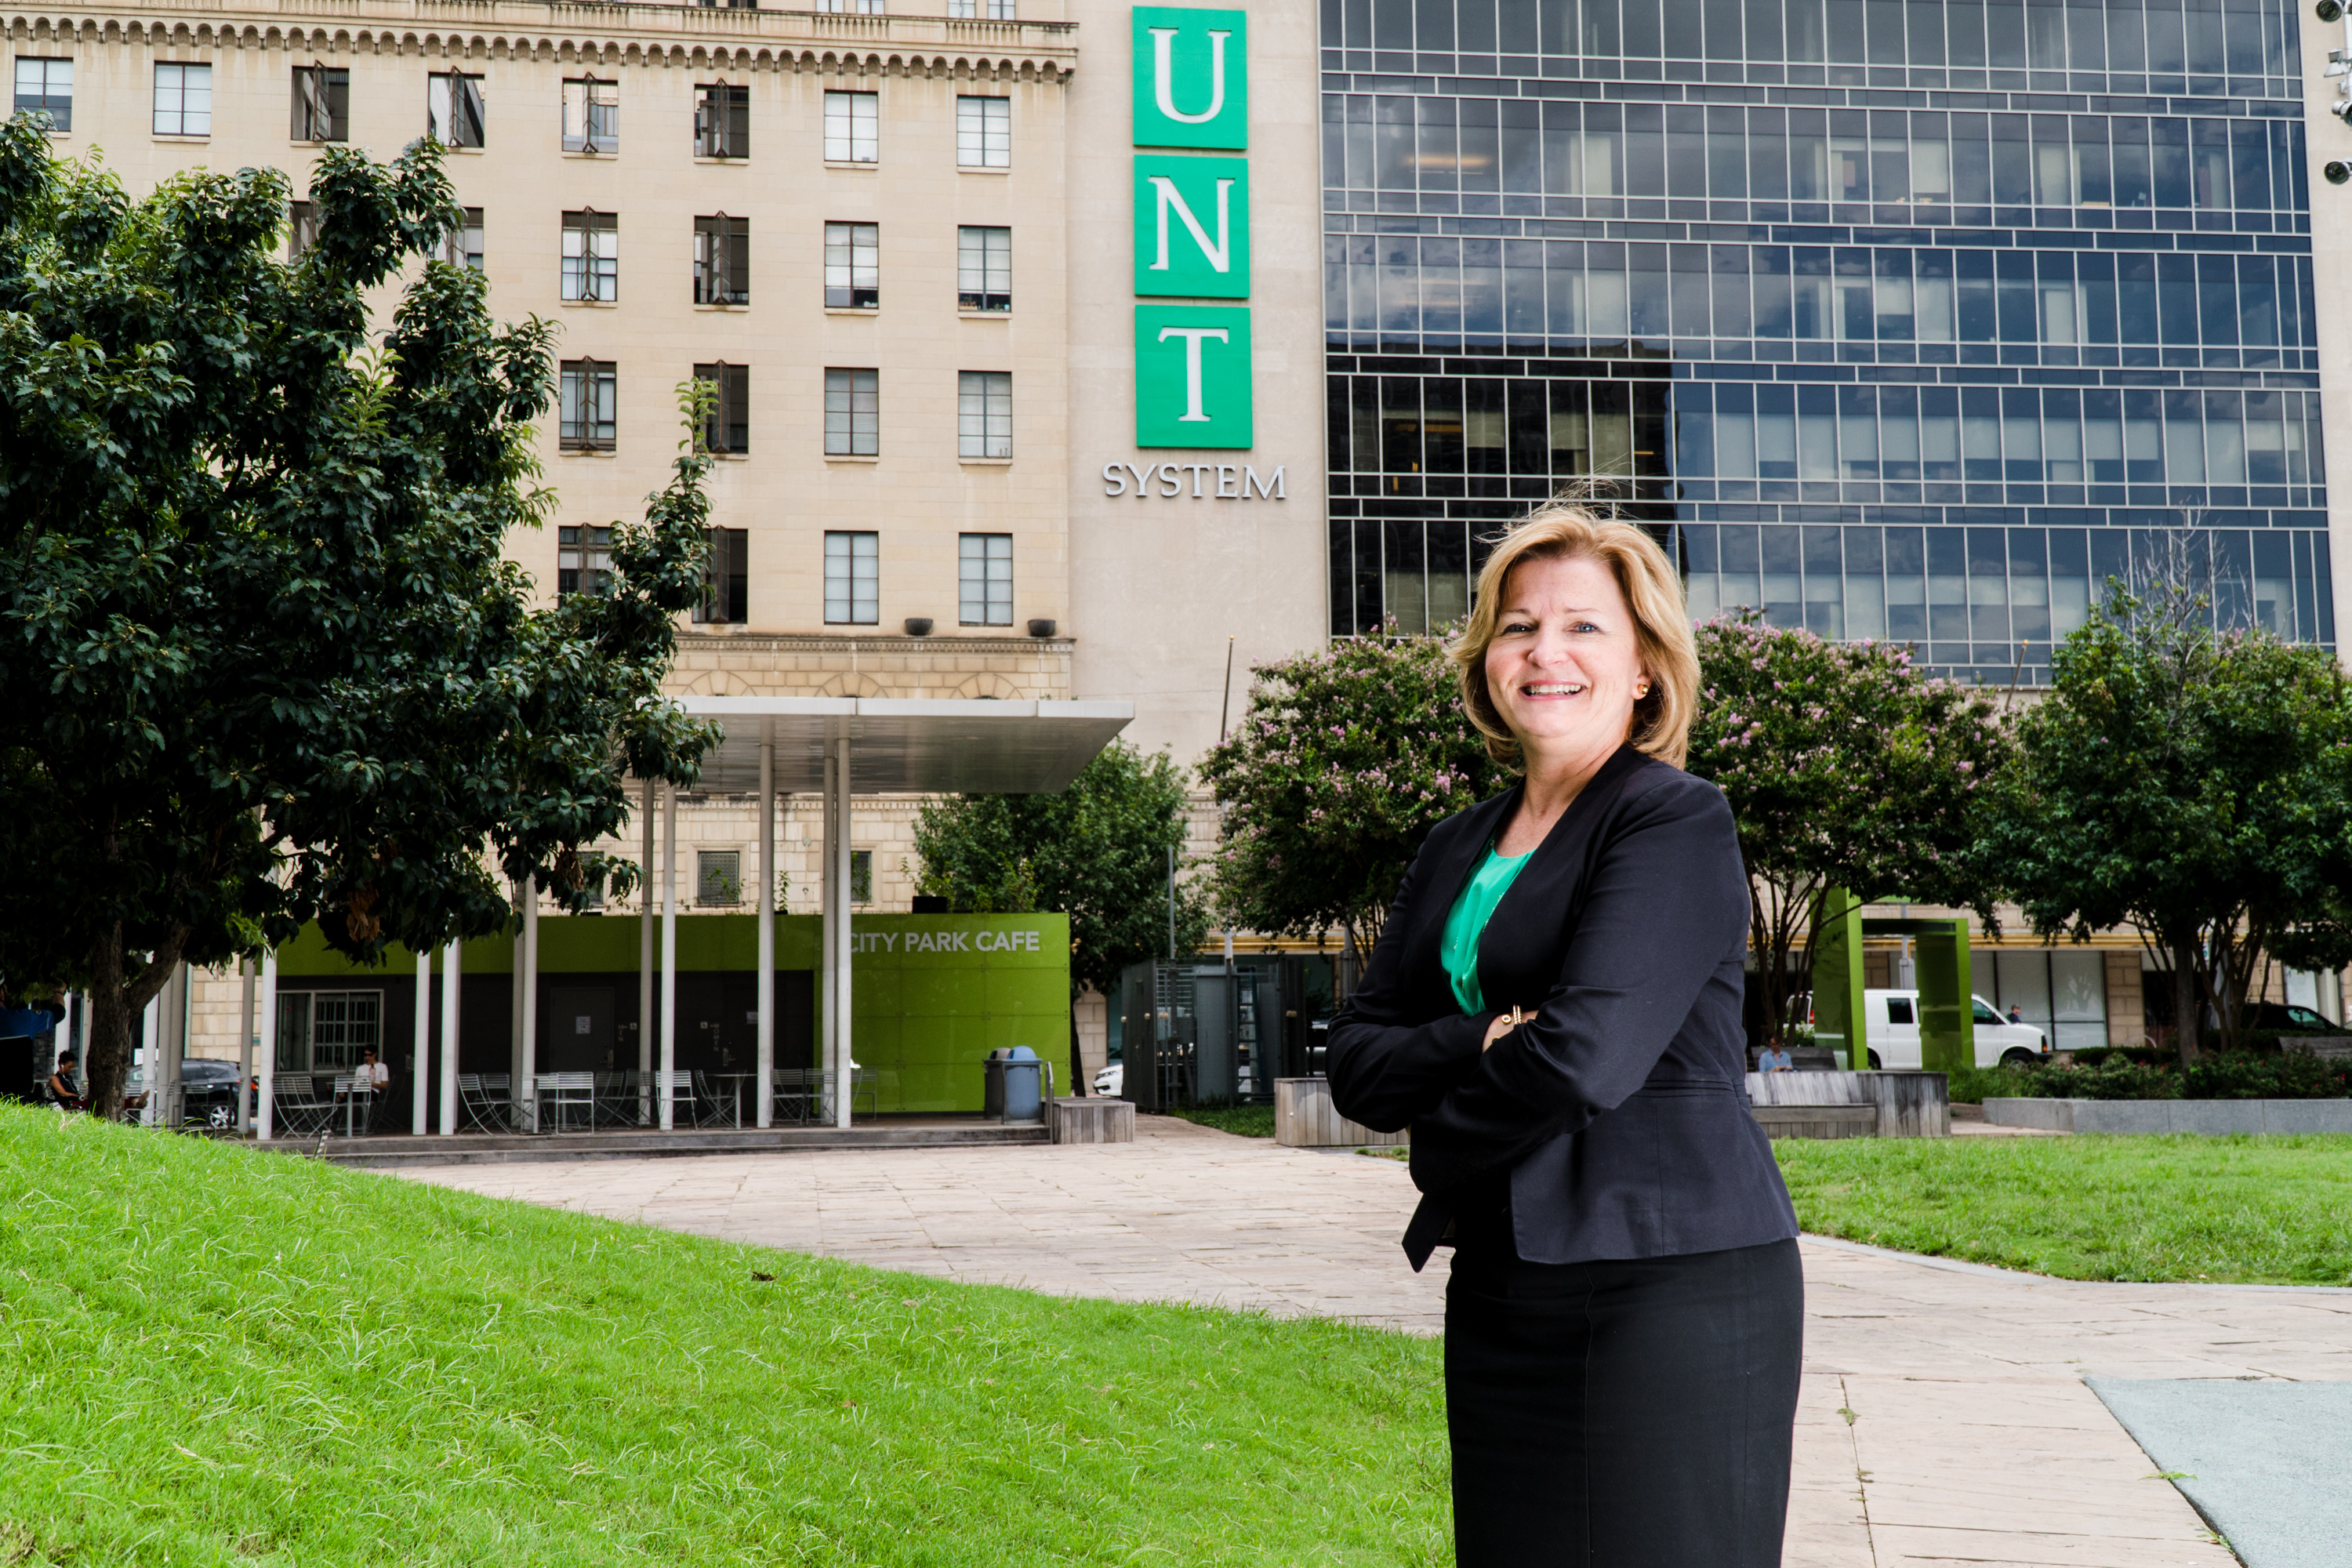 NASA's Deputy Chief Operating Officer, Lesa B. Roe, named sole finalist for UNT System Chancellor position